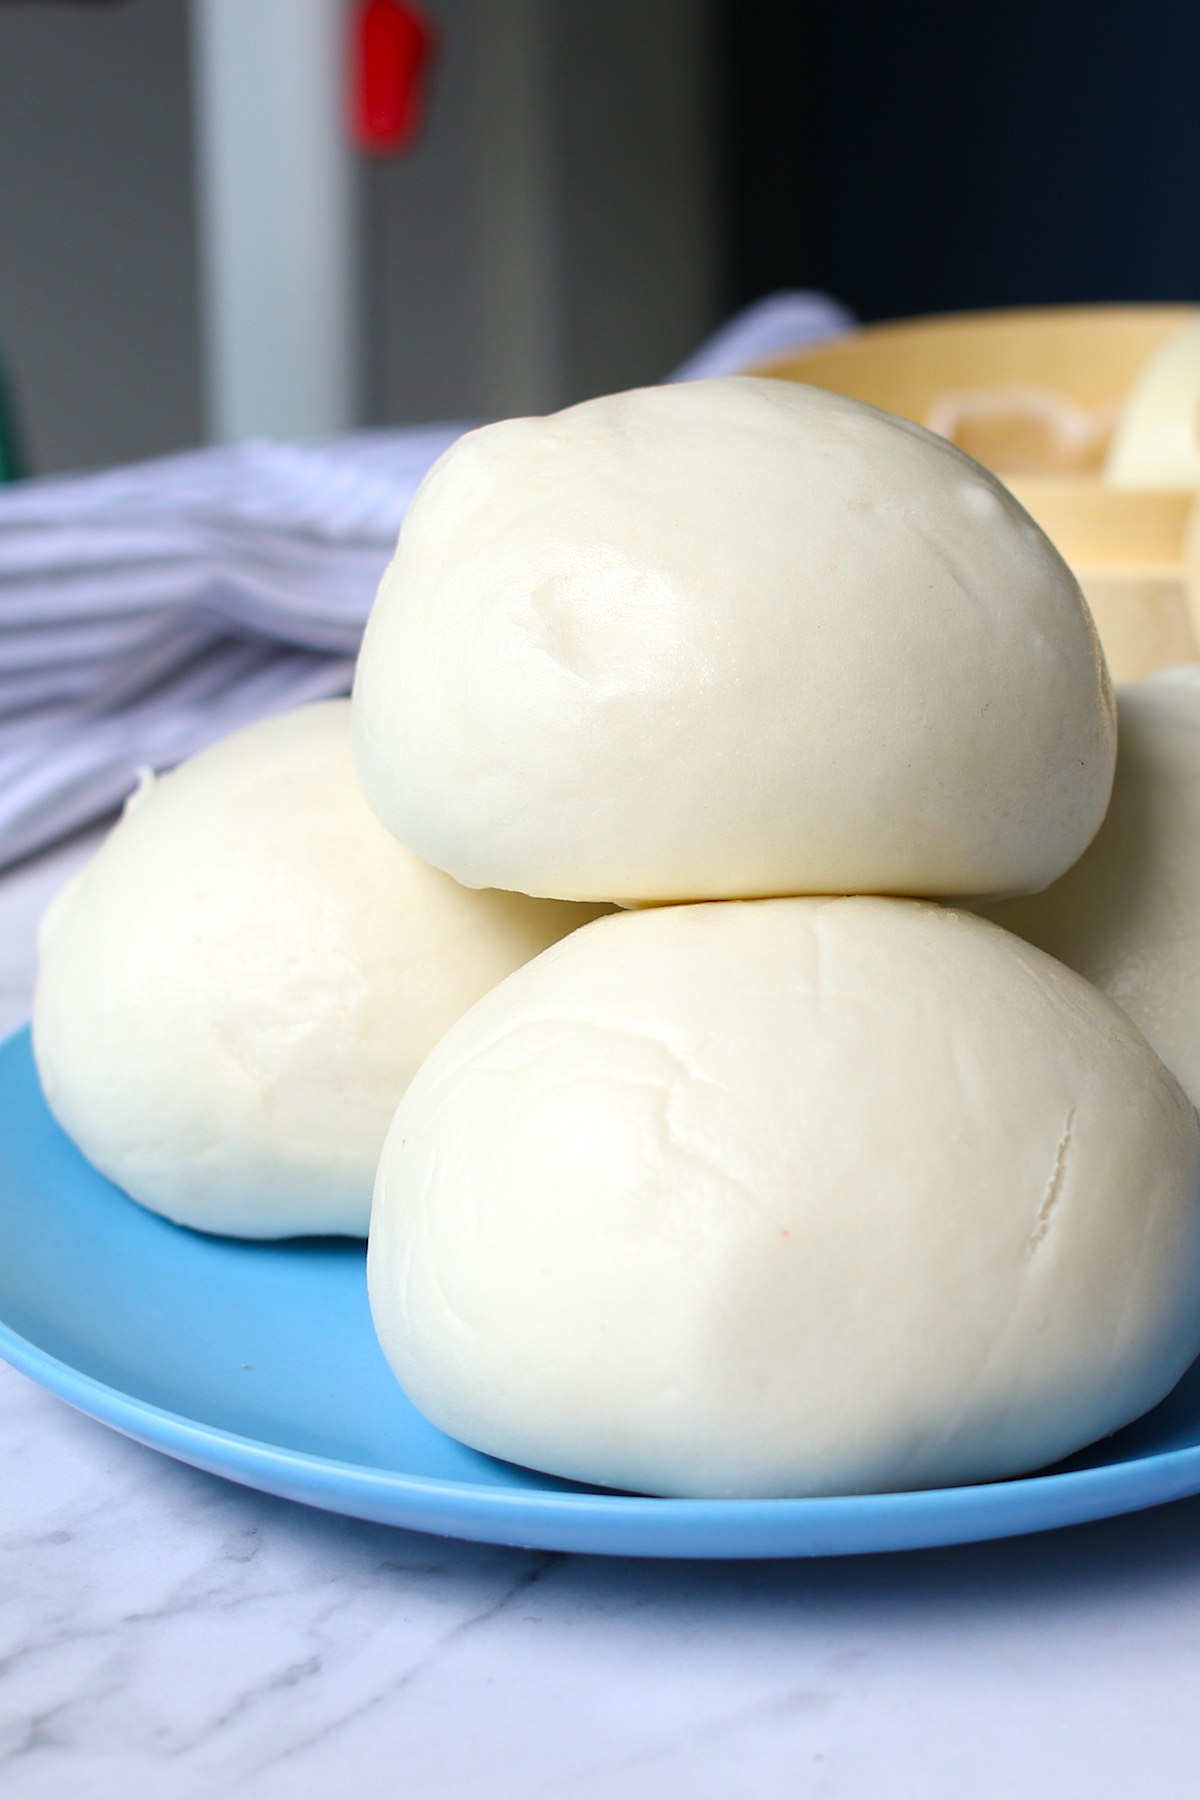 Freshly made steamed buns stacked on a serving plate ready to eat